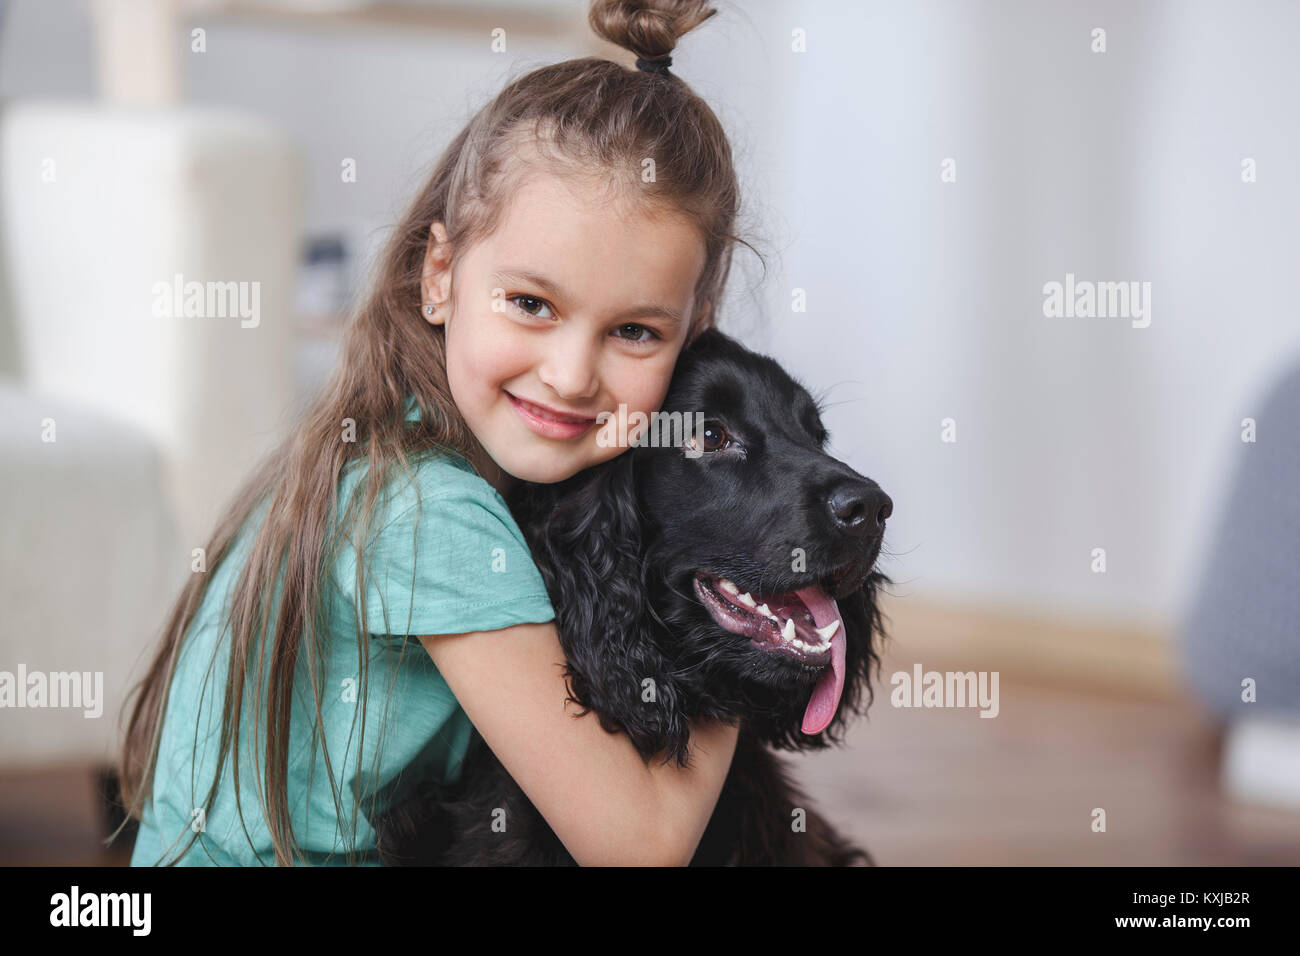 Portrait of smiling girl embracing Cocker Spaniel at home Stock Photo